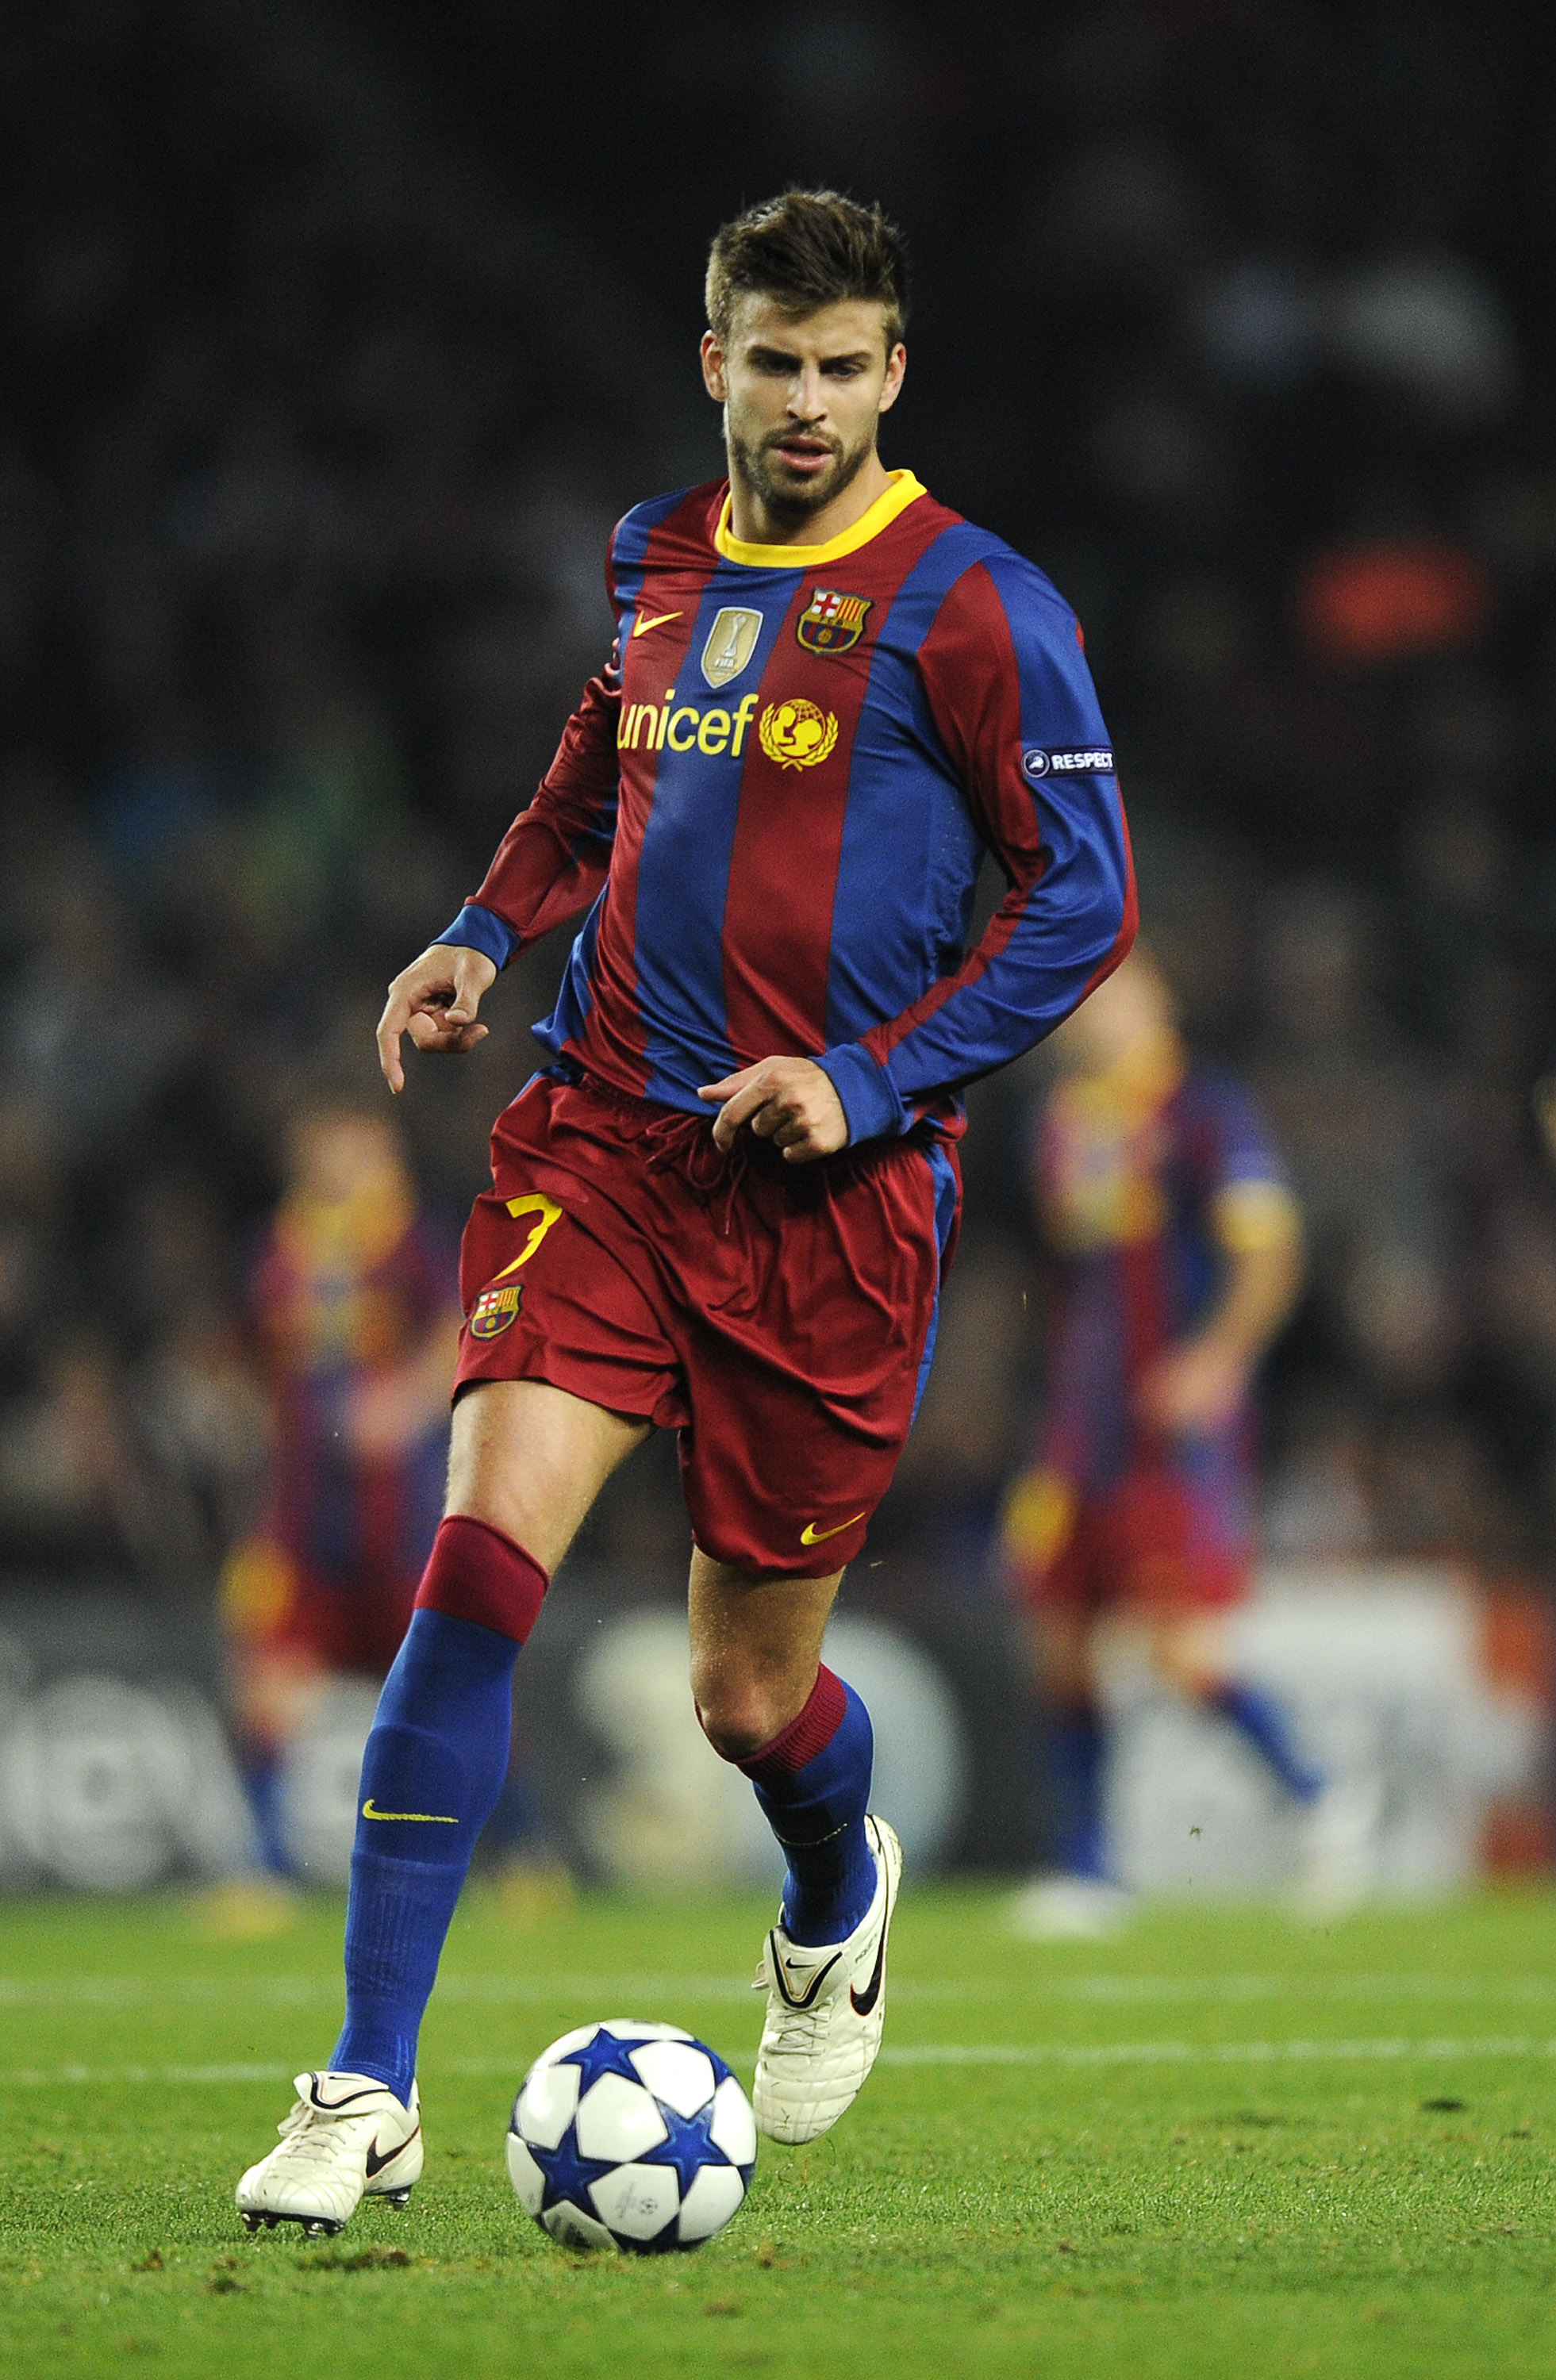 BARCELONA, SPAIN - OCTOBER 20:  Gerard Pique of Barcelona runs with ball during the UEFA Champions League group D match between Barcelona and FC Copenhagen at the Camp nou stadium on October 20, 2010 in Barcelona, Spain. Barcelona won the match 2-0.  (Pho